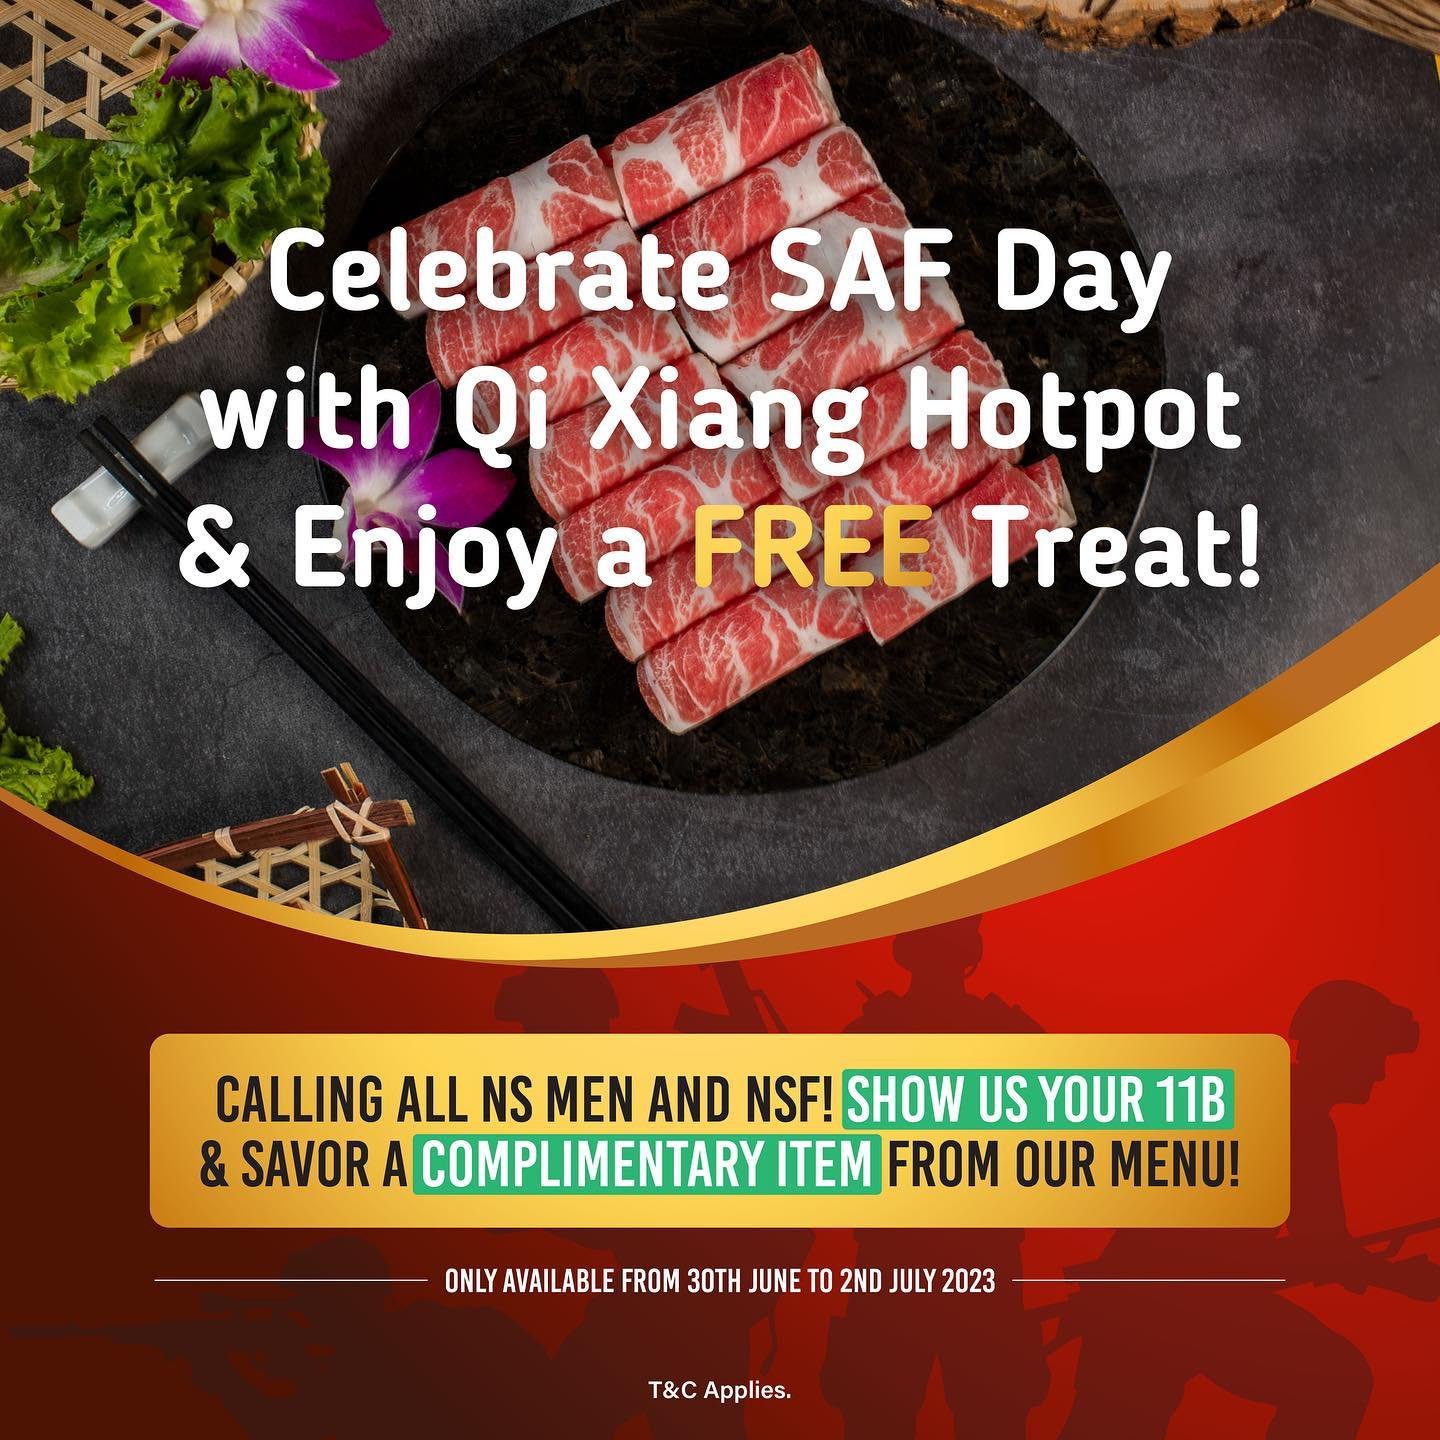 🎉 Celebrate NS Day with us and enjoy a FREE treat! 🇸🇬🫡 

Simply show us your 11B when you dine-in to claim your complimentary item from our menu. Gather your fellow NS Men and NSF for a memorable dining experience. 🍽️ 

Hurry, this exclusive off